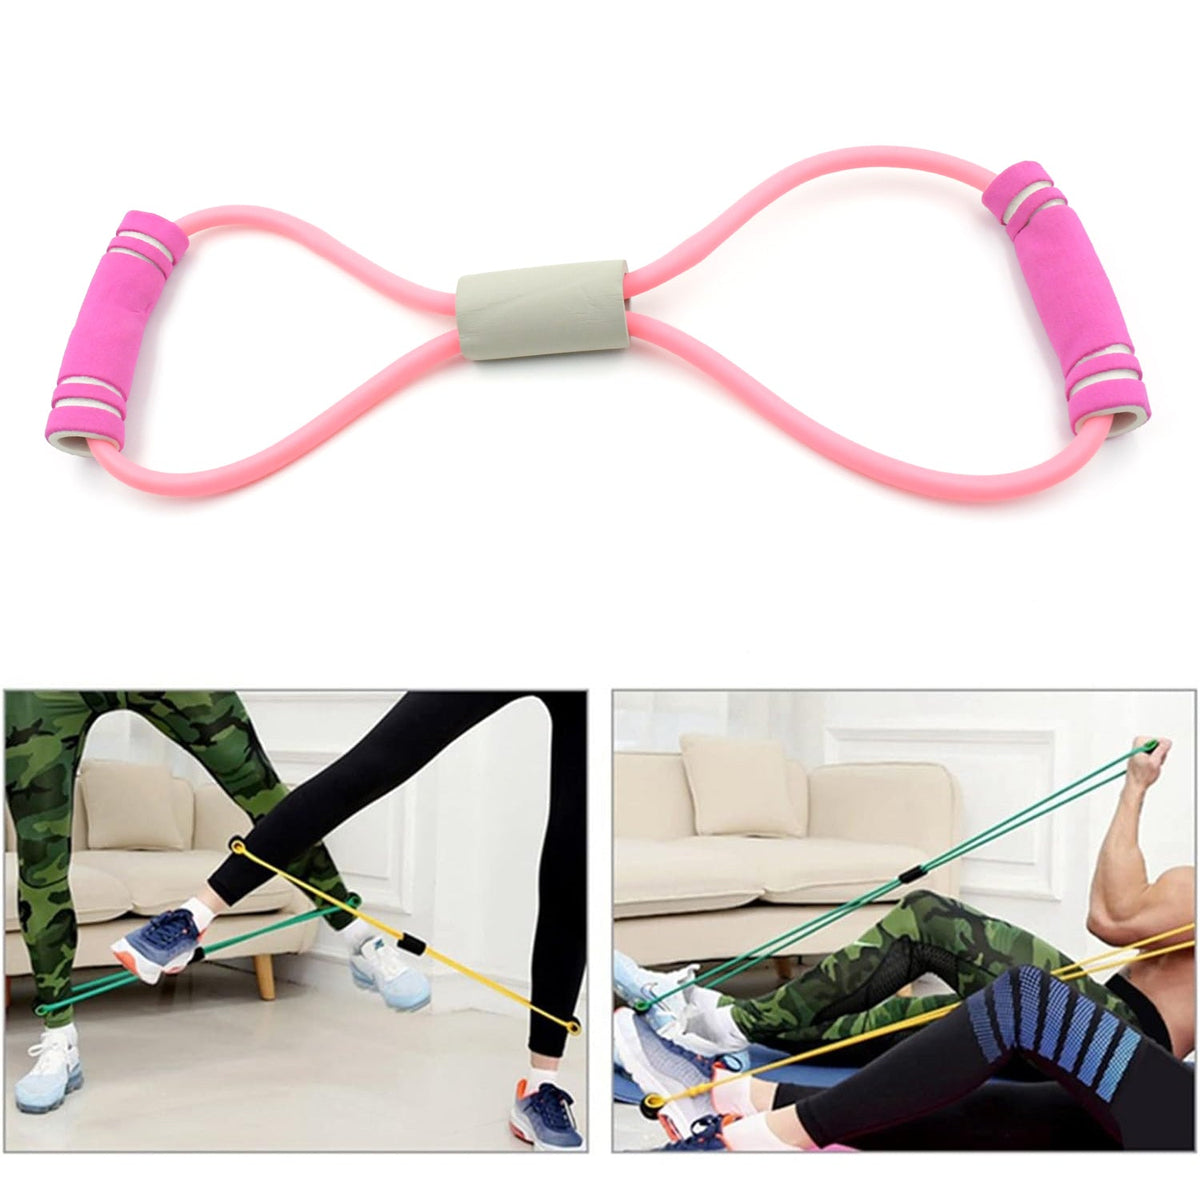 8415 Sport Resistance Loop Band Yoga Bands Rubber Exercise Fitness Training Gym Strength Resistance Band, Exercise Equipment, Bands for Working Out (1 Pc)